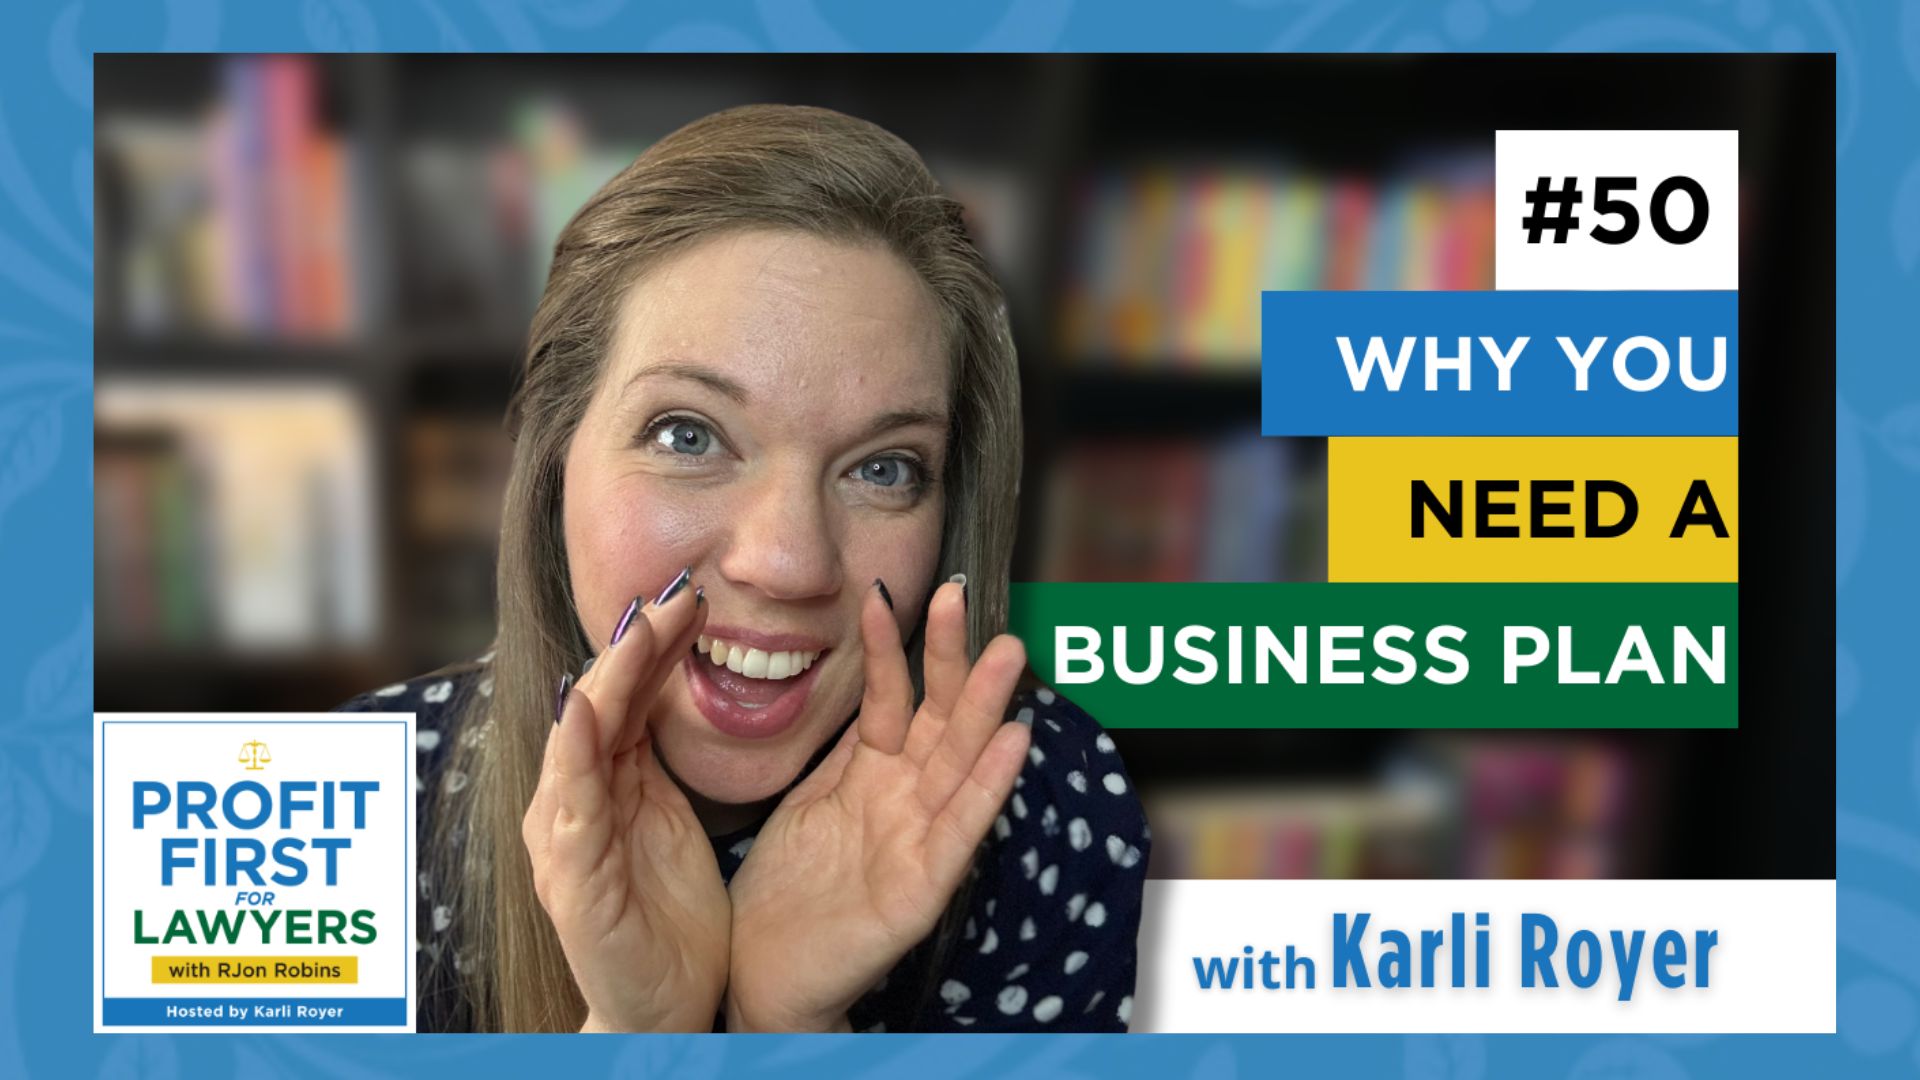 featured image for episode 50 of the Profit First for Lawyers podcast showing host Karli Royer cupping her hands around her mouth like she is using her hands to amplify her voice. Title "#50 Why You Need A Business Plan"